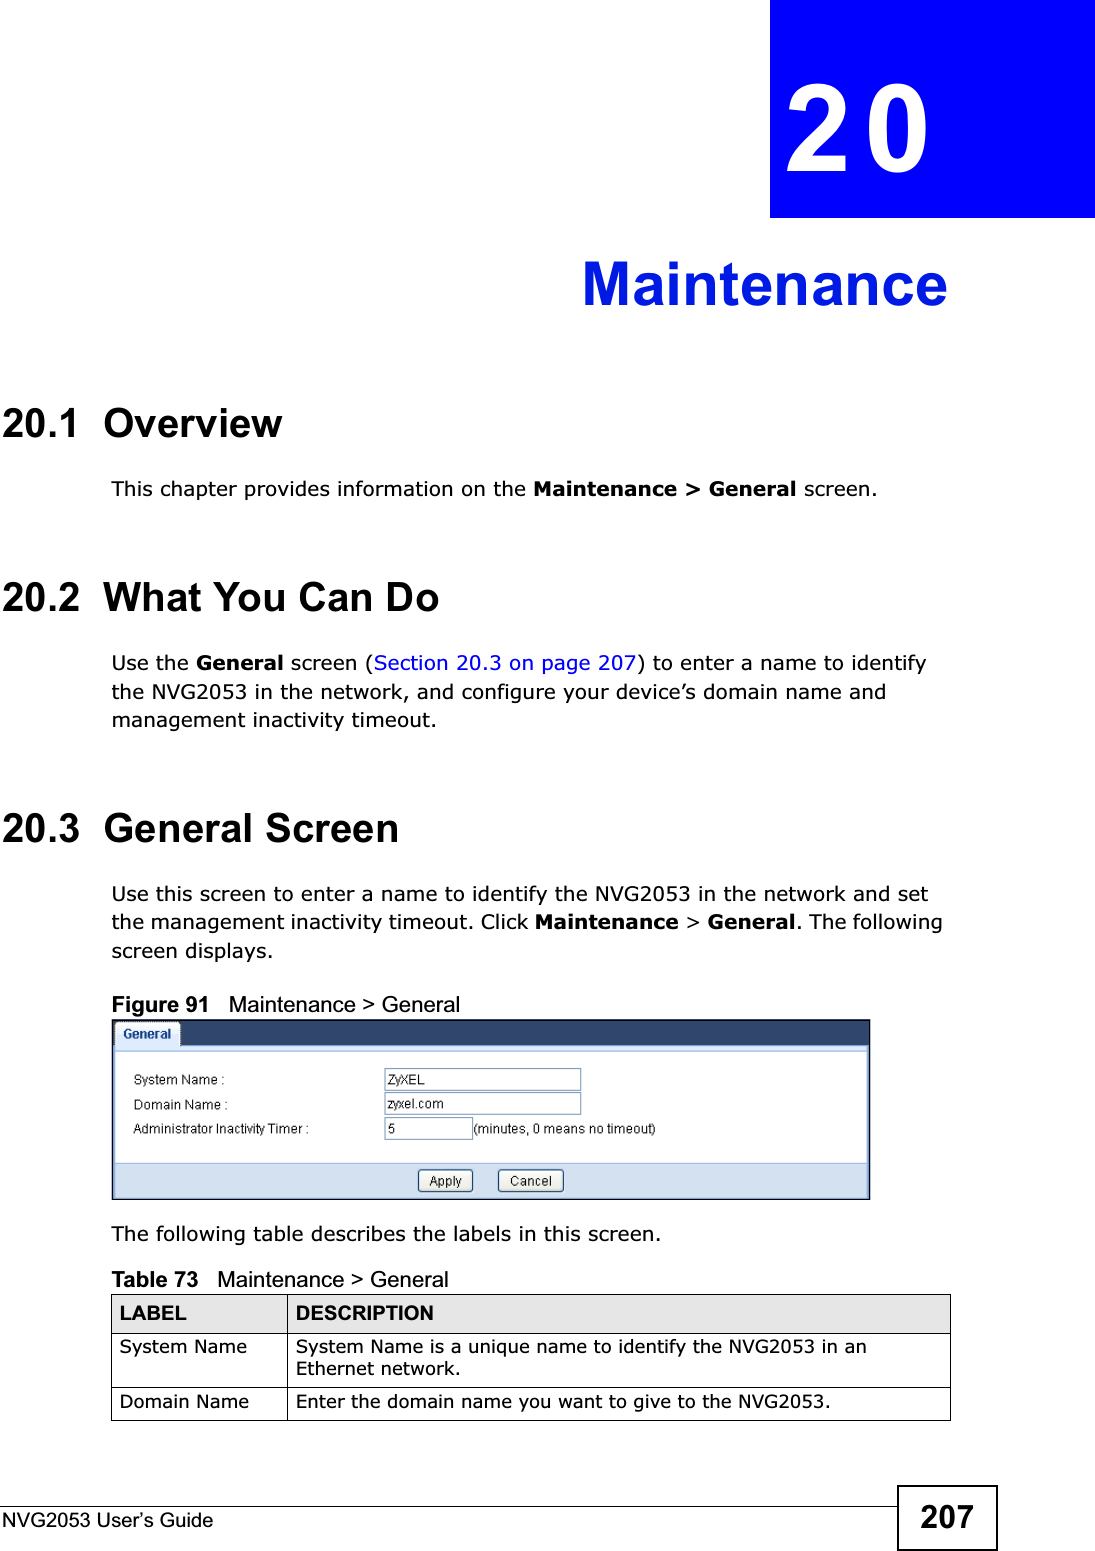 NVG2053 User’s Guide 207CHAPTER 20Maintenance20.1  OverviewThis chapter provides information on the Maintenance &gt; General screen. 20.2  What You Can DoUse the General screen (Section 20.3 on page 207) to enter a name to identify the NVG2053 in the network, and configure your device’s domain name and management inactivity timeout.20.3  General Screen Use this screen to enter a name to identify the NVG2053 in the network and set the management inactivity timeout. Click Maintenance &gt; General. The following screen displays.Figure 91   Maintenance &gt; General The following table describes the labels in this screen.Table 73   Maintenance &gt; GeneralLABEL DESCRIPTIONSystem Name System Name is a unique name to identify the NVG2053 in an Ethernet network.Domain Name Enter the domain name you want to give to the NVG2053.  